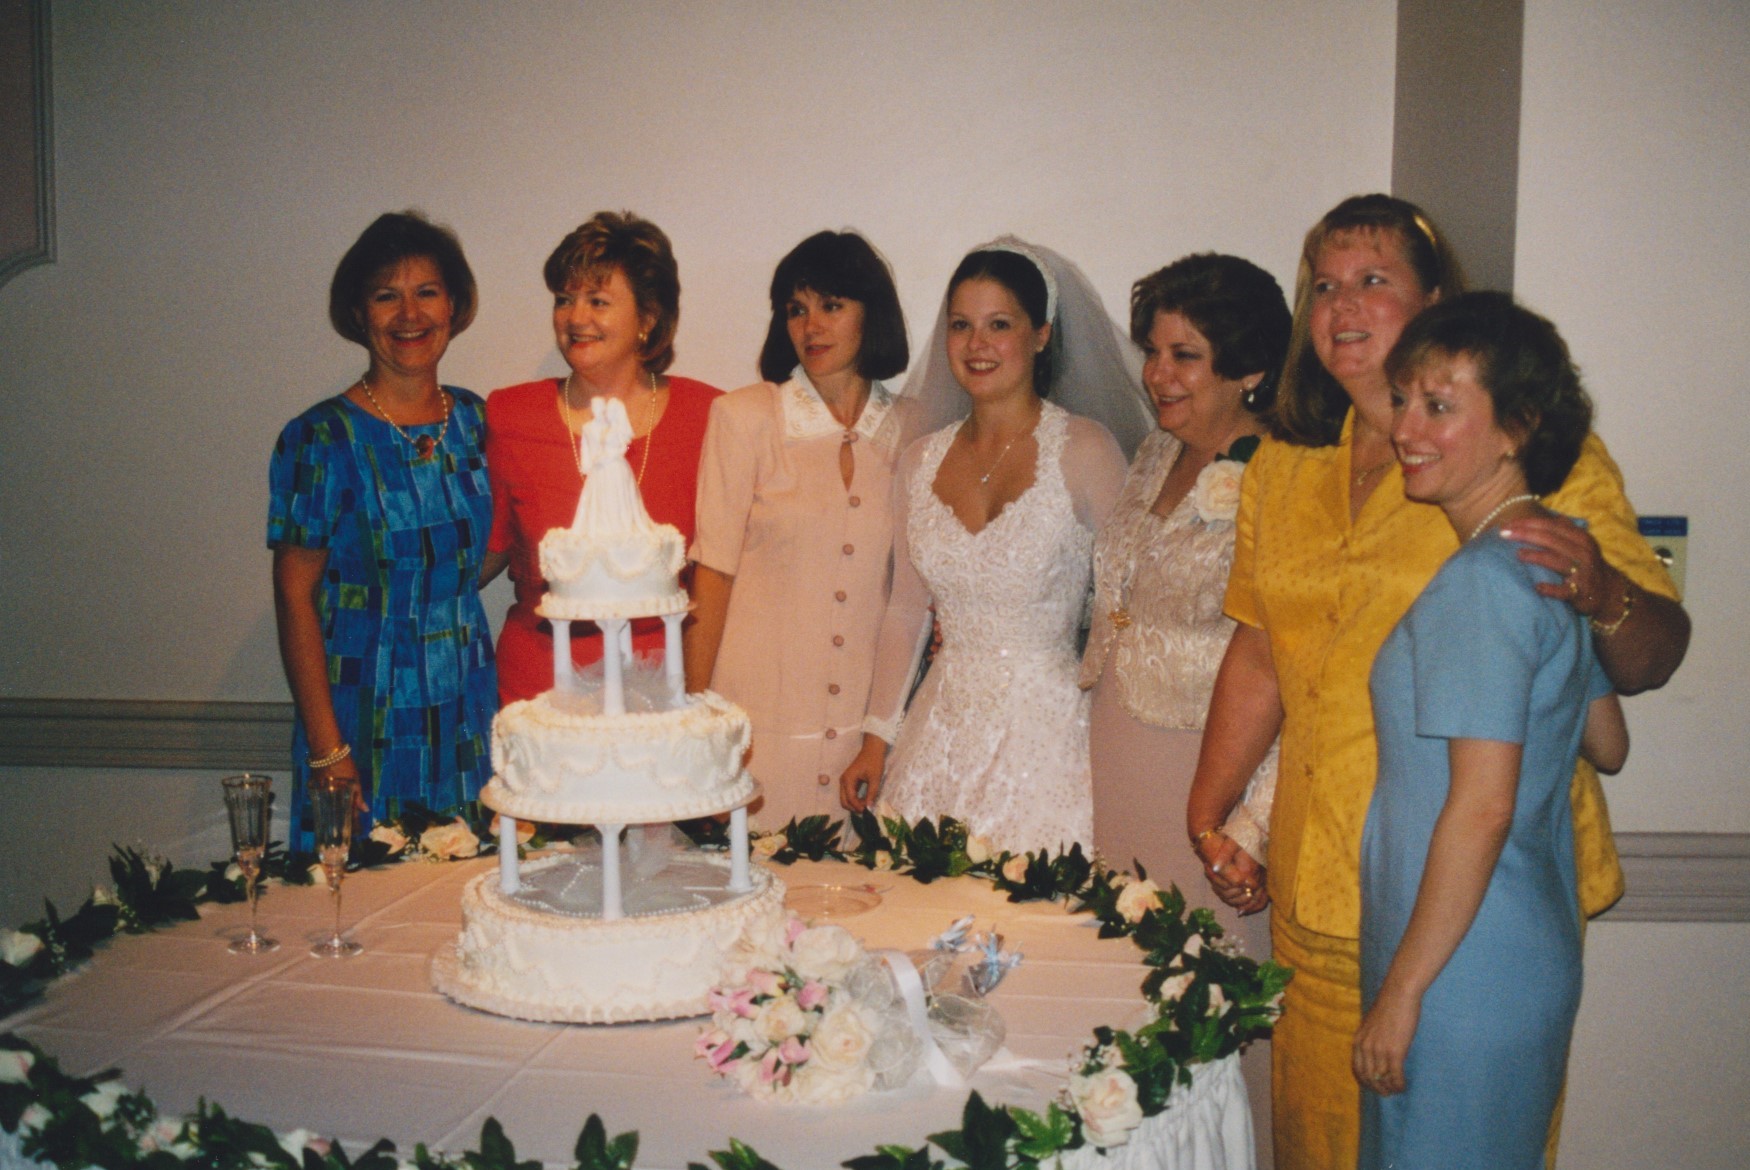 Jeanne at Daughter Wedding with Bunco Group 1998.jpg